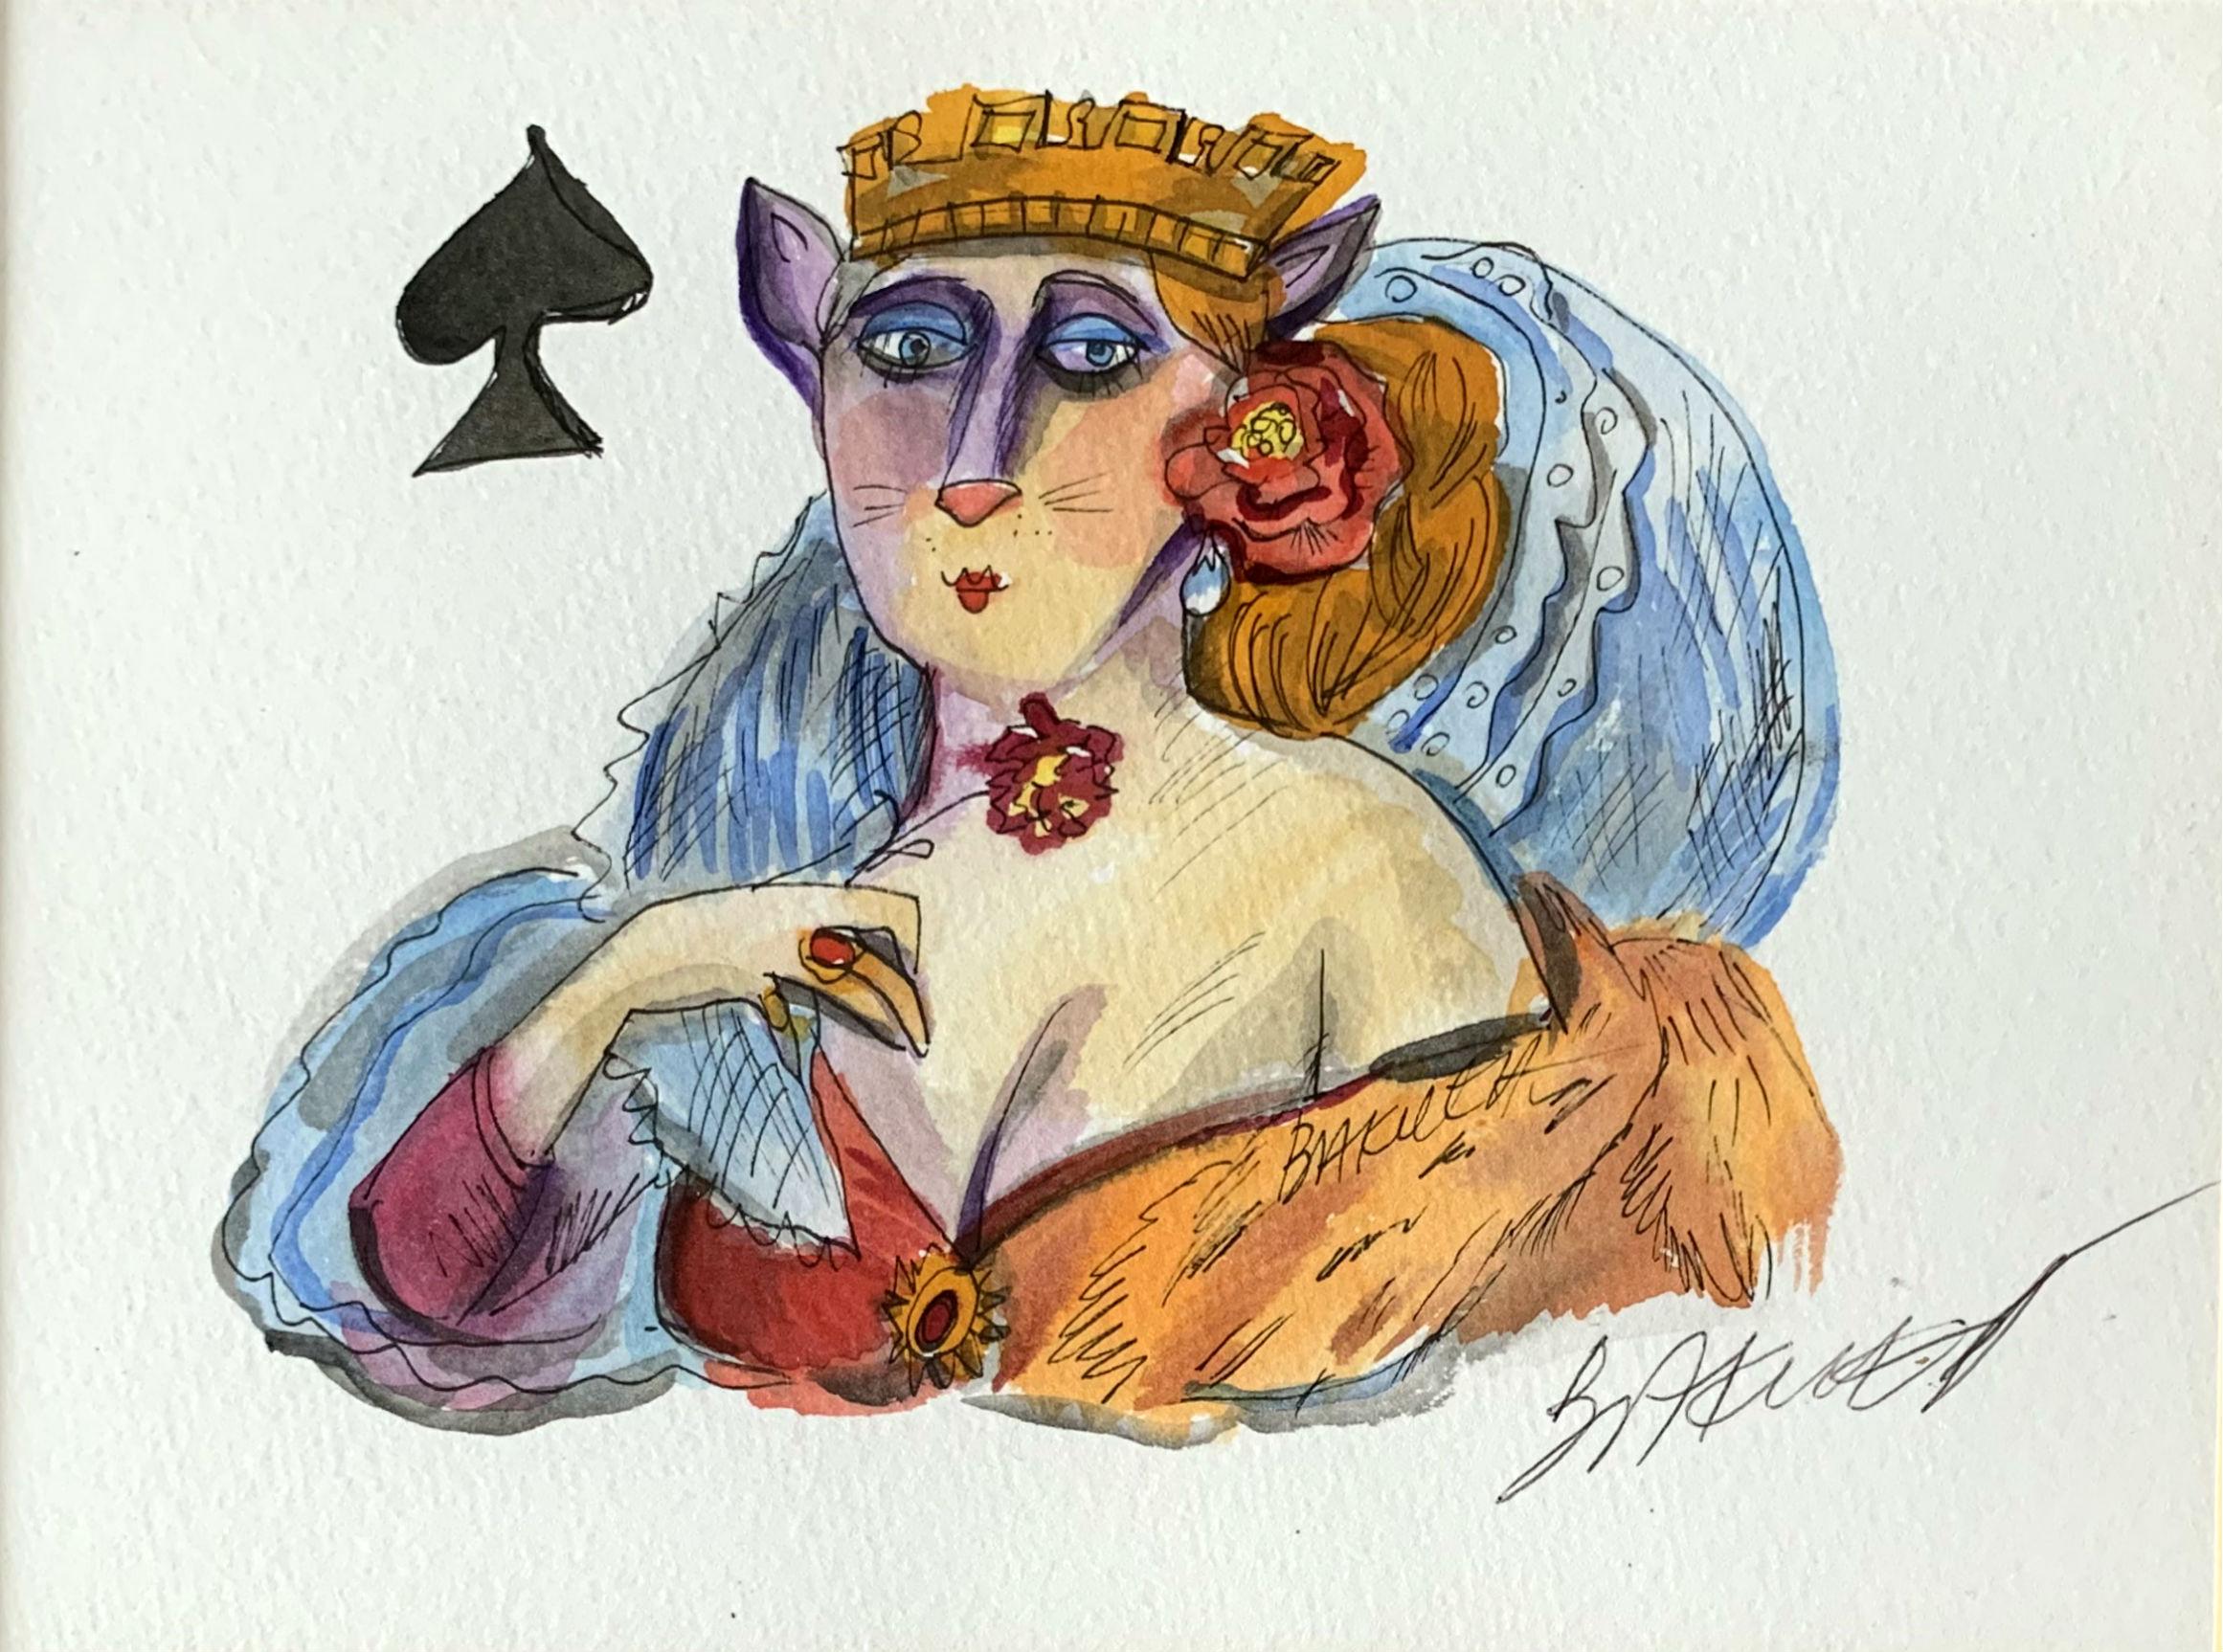 Lady of spades - Watercolor painting, Figurative, Colourful